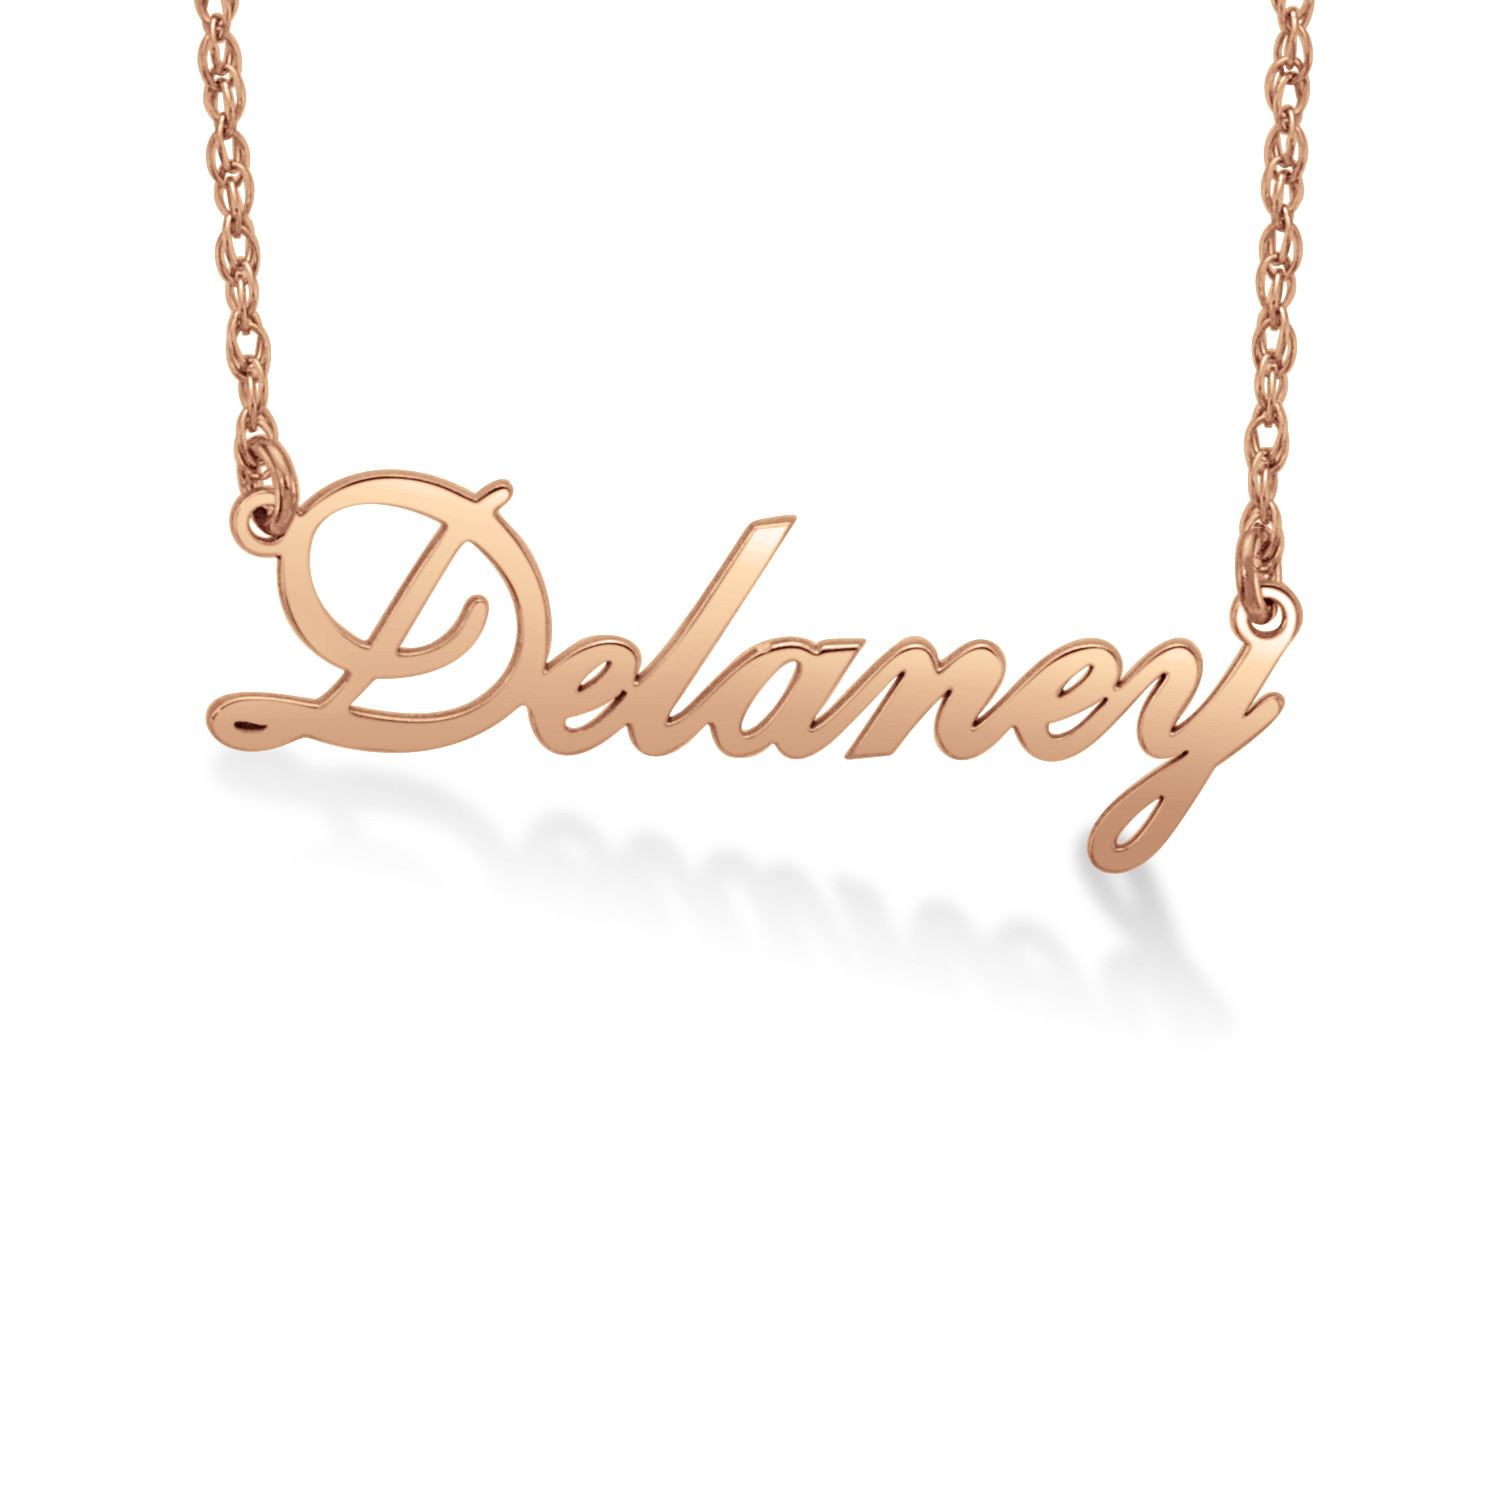 1 x GIRL High Quality PERSONALISED Name CHARMS Chain BRACELET or Chain NECKLACE